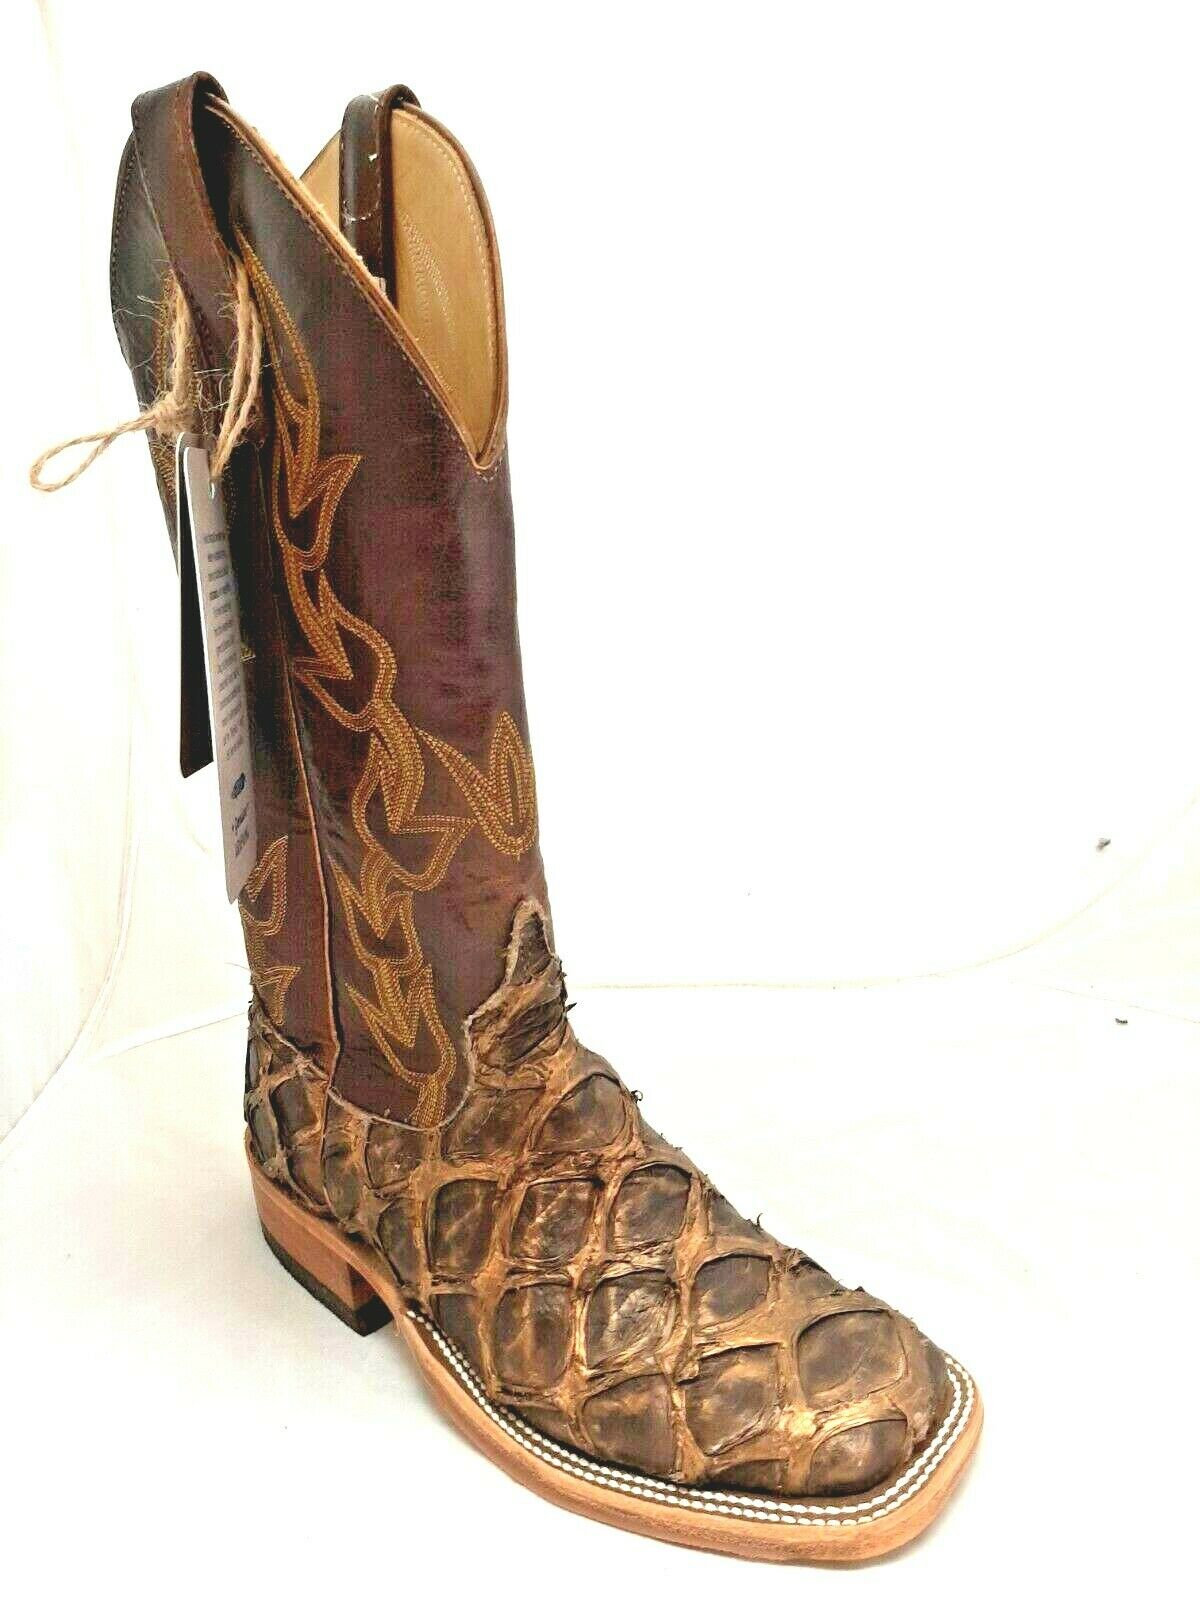 WOMEN'S ANDERSON BEAN BIG BASS BRONZE WESTERN BOOTS 330824 SQUARE TOE